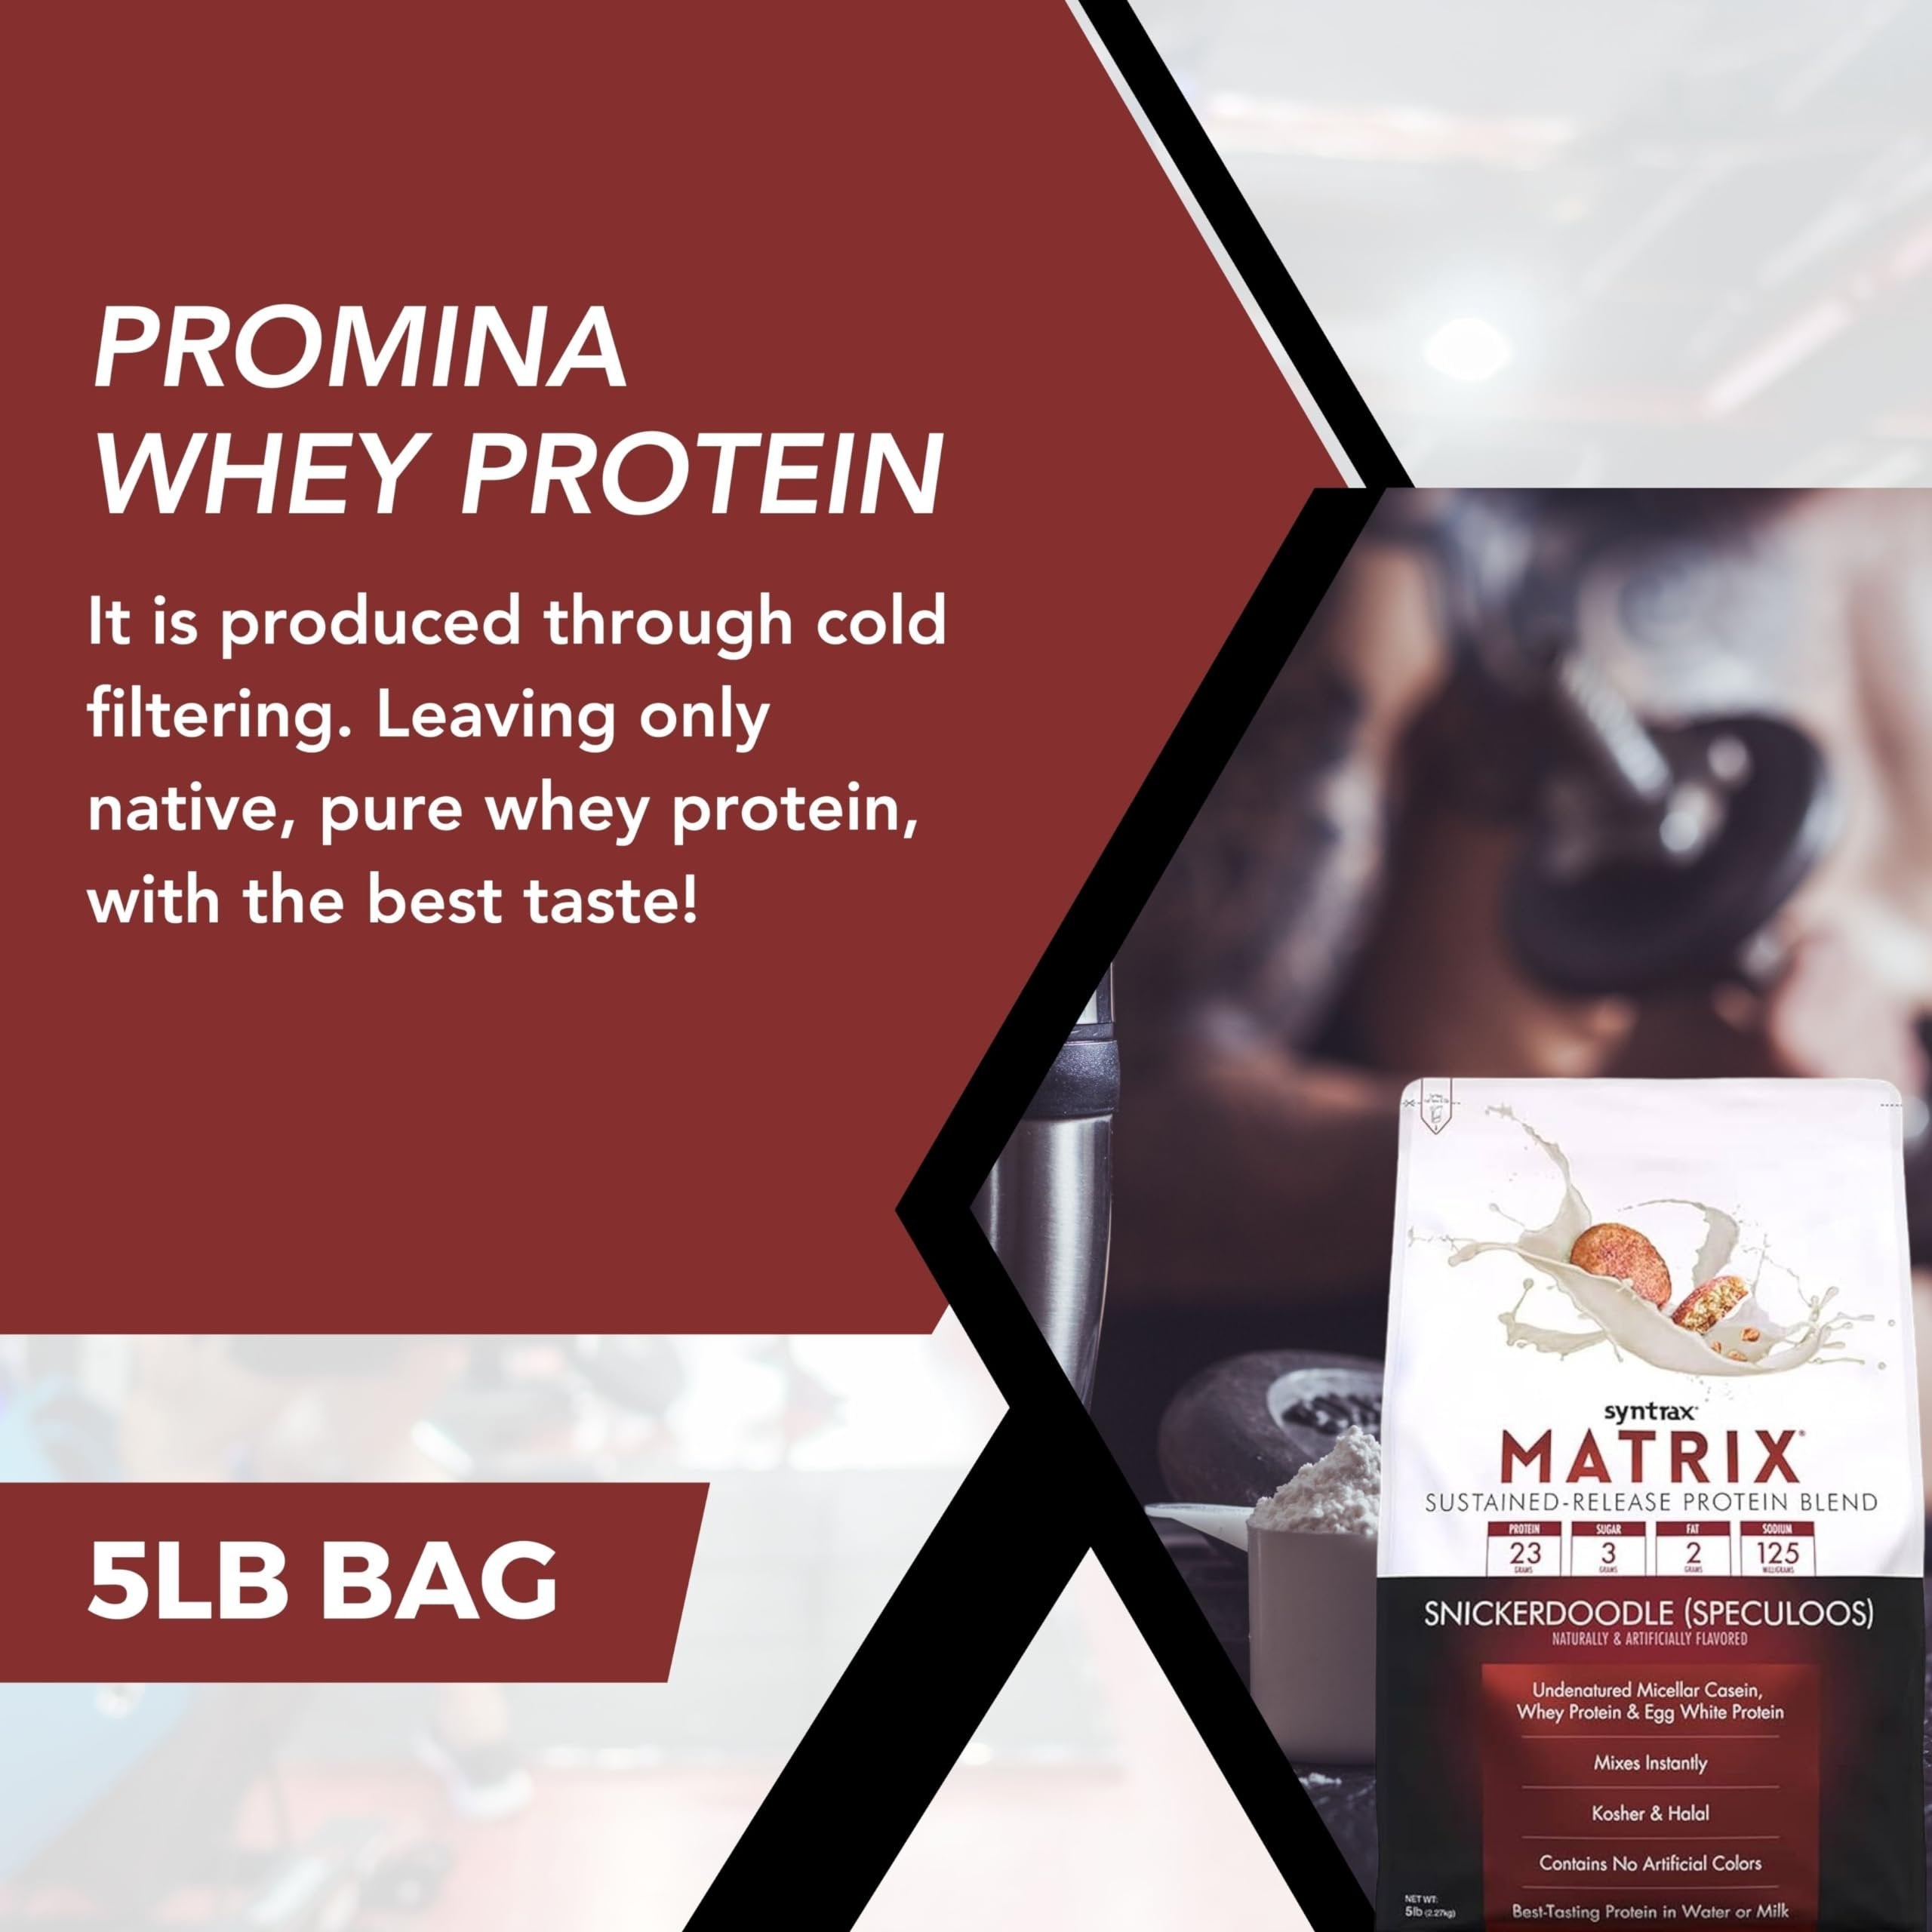 Syntrax Bundle, 2 Items Matrix Protein Powder Sustained-Release Casein Protein and Whey Protein Powder - Instant Mix Snickerdoodle Protein Powder Flavor, 5lbs with Worldwide Nutrition Keychain